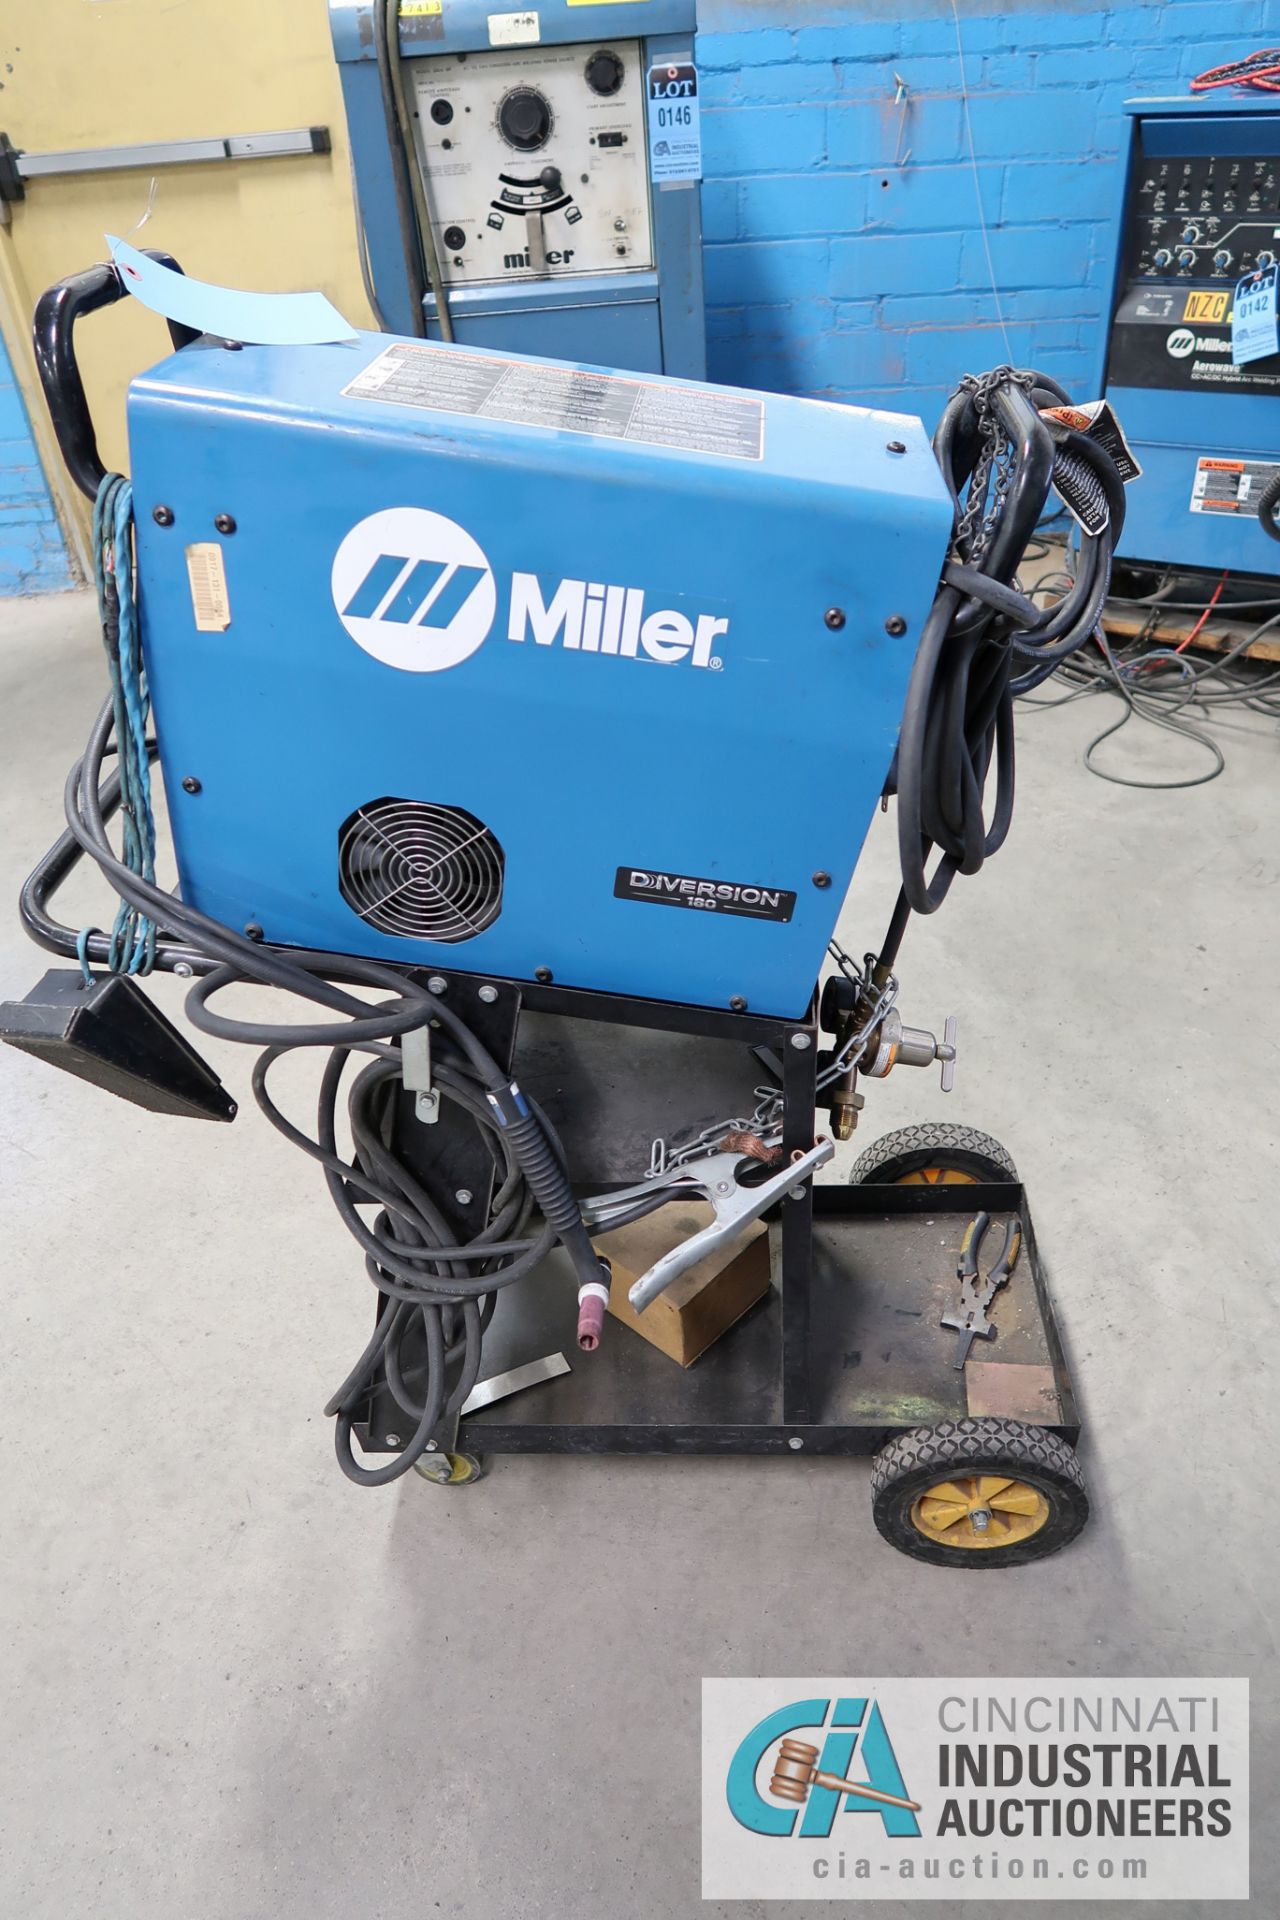 180 AMP MILLER DIVERSON 180 TIG WELDER POWER SOURCE; S/N MF360924L, WITH CART, LEADS, AND FOOT PEDAL - Image 4 of 4